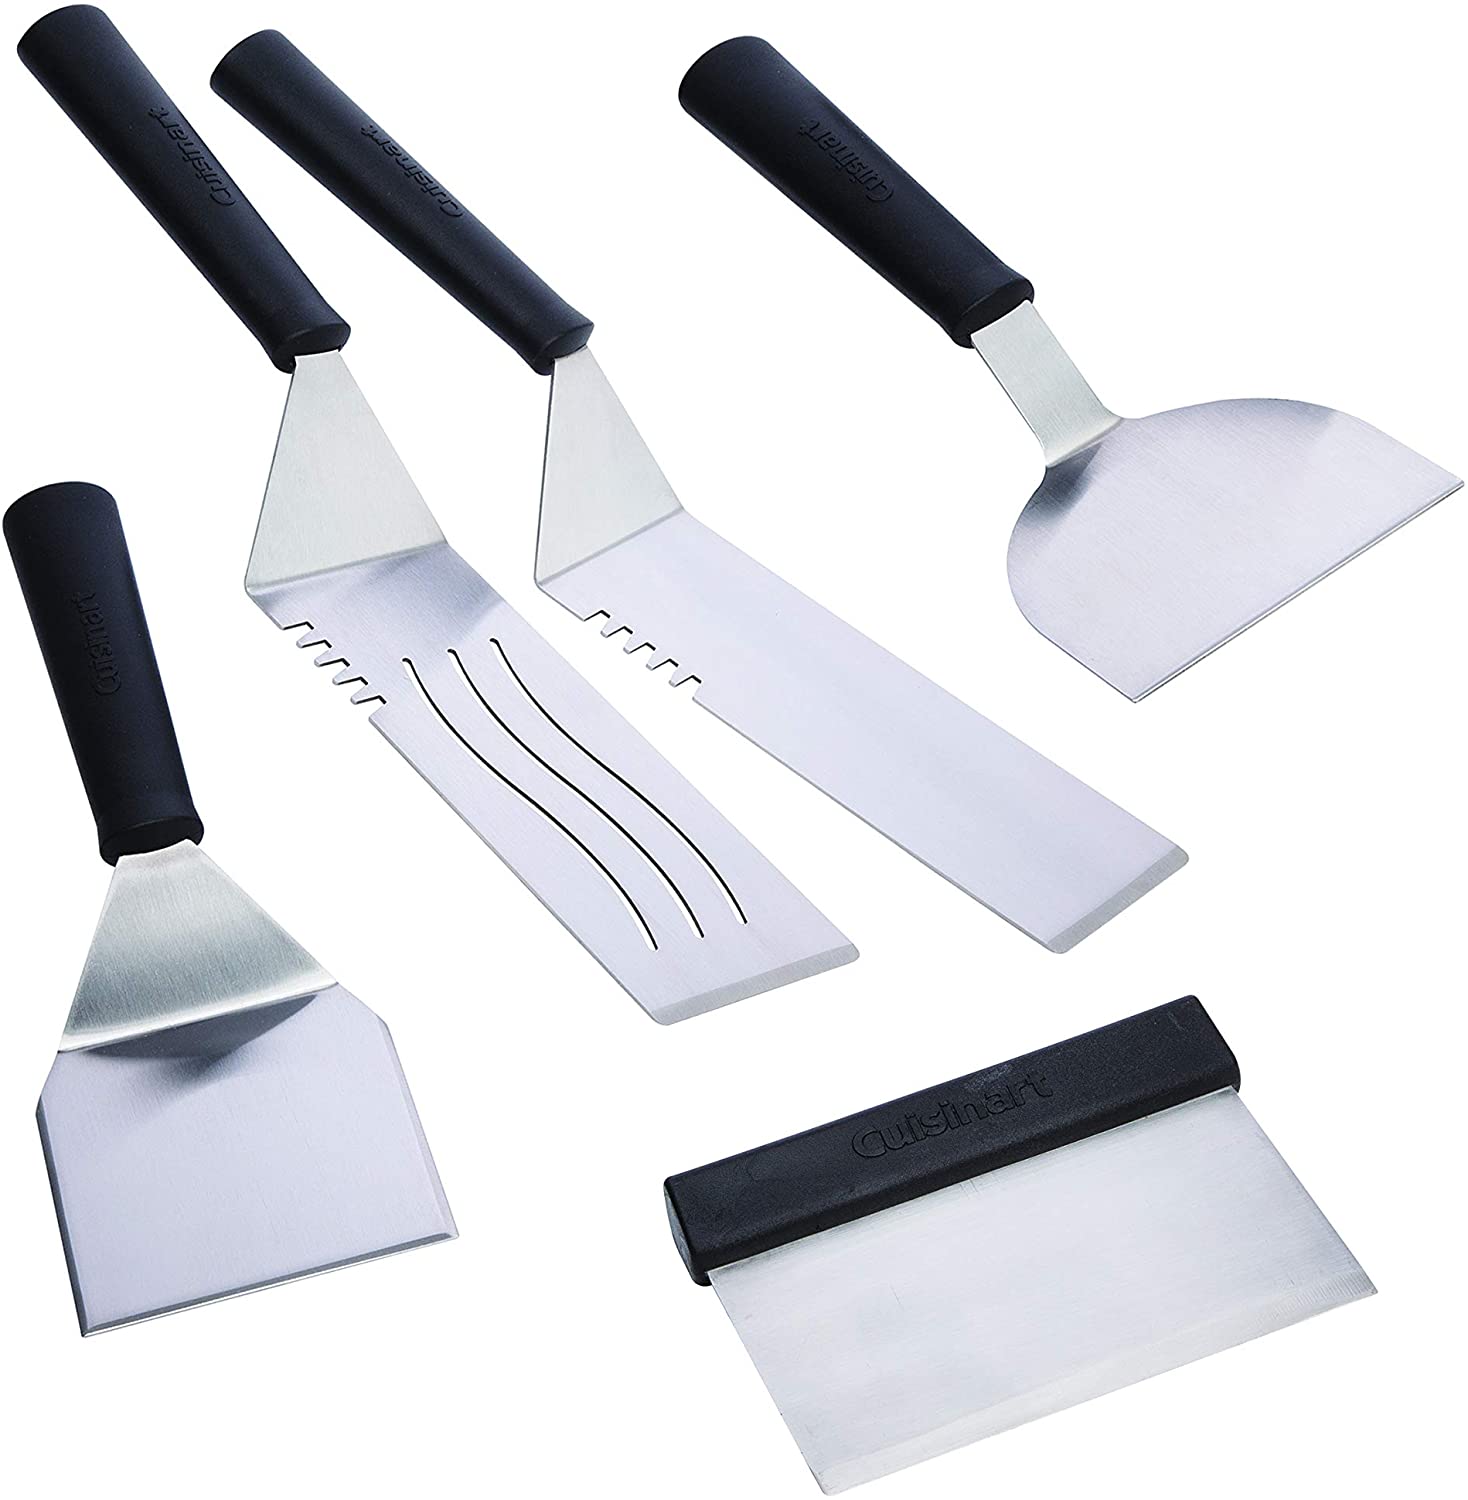 5-Piece Cuisinart Stainless Steel Griddle Spatula Set (CGS-509) $15.50 + Free Shipping w/ Amazon Prime or on $25+